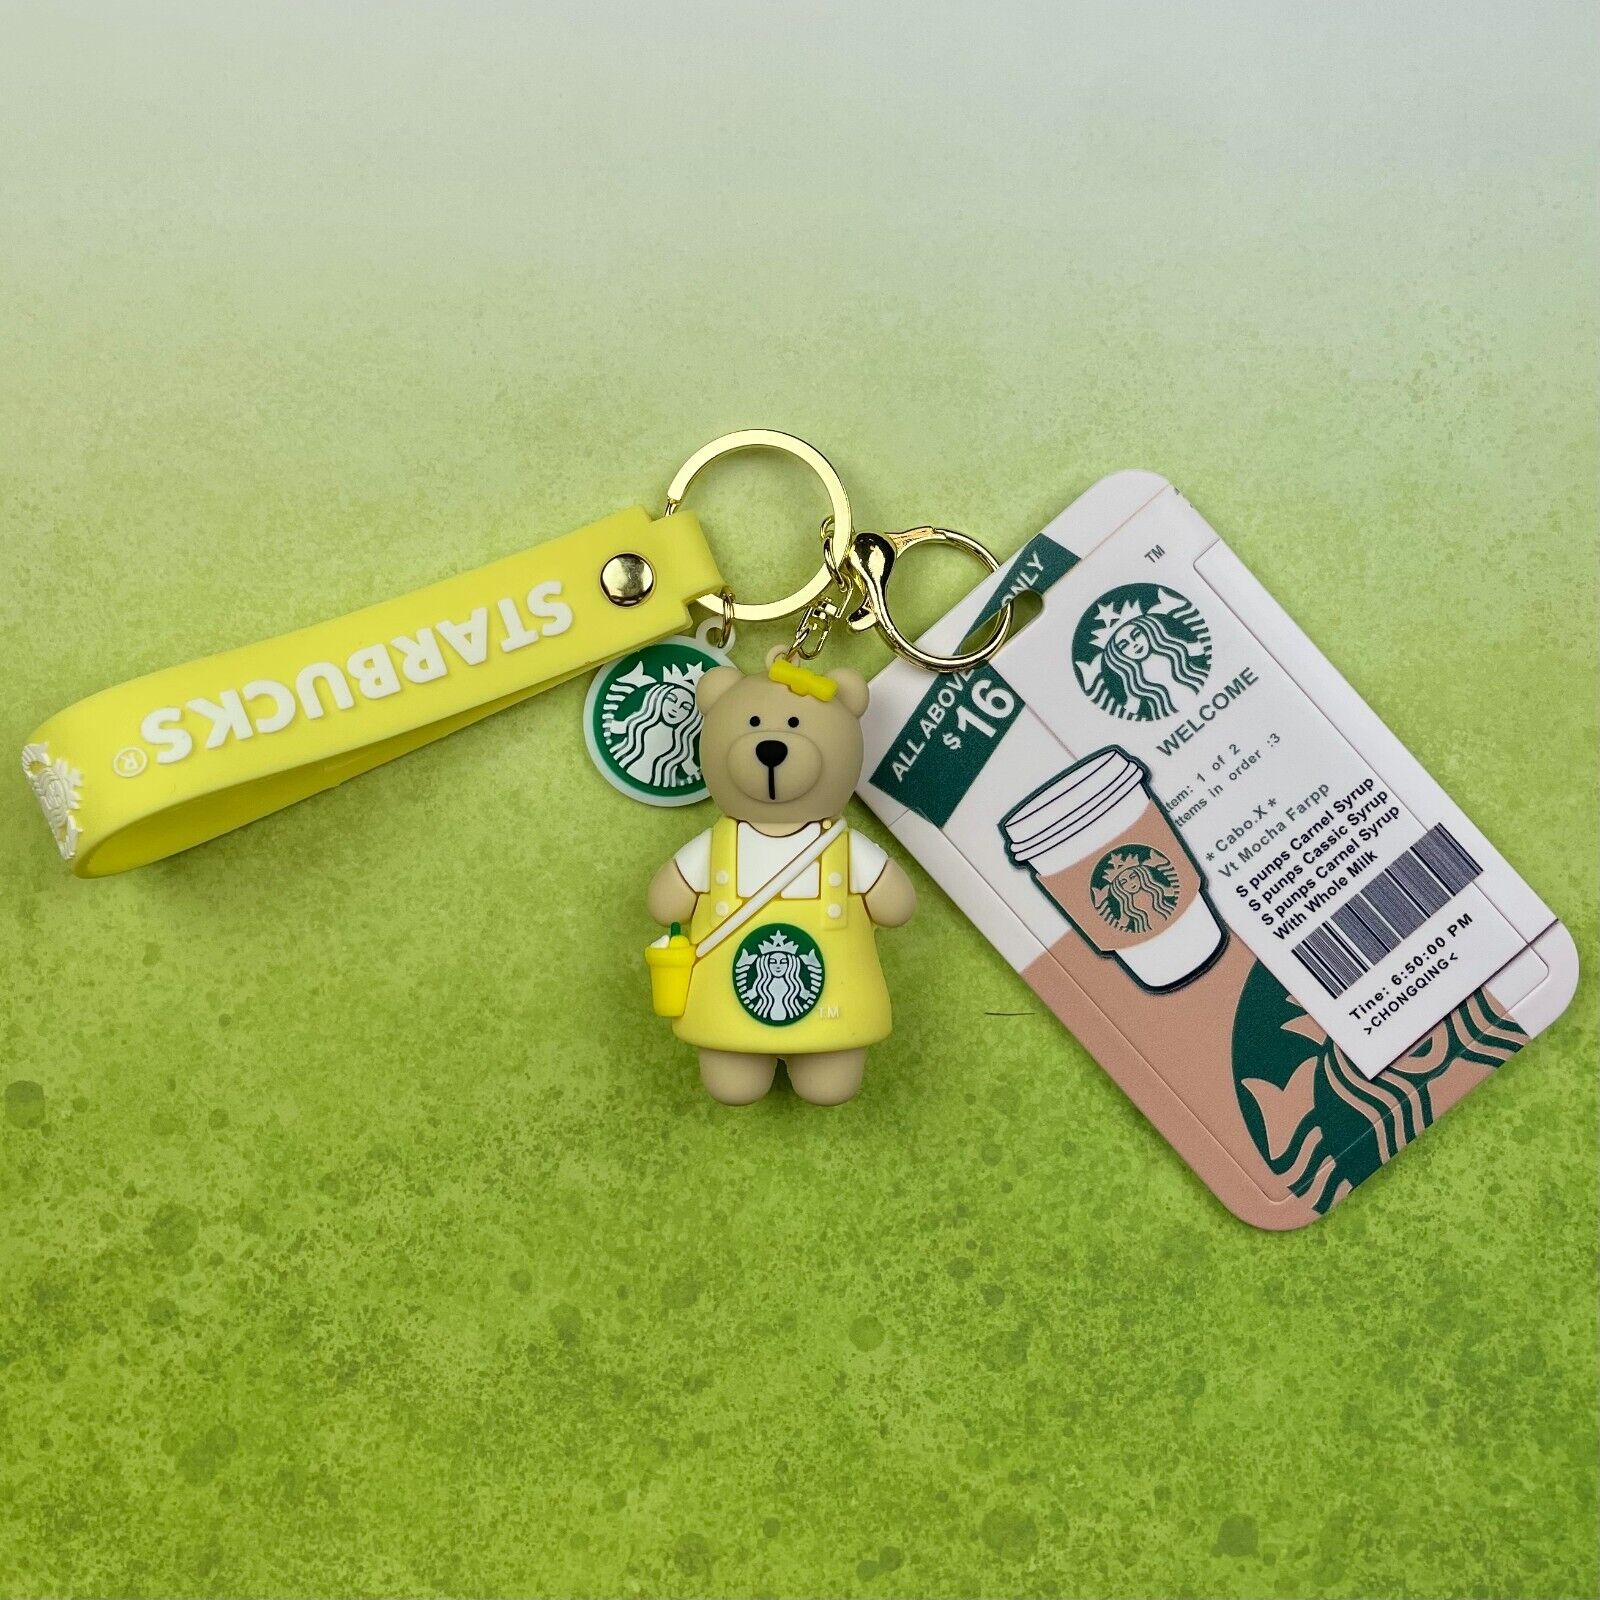 STARBUCKS KEYCHAIN BEAR BARISTA IN YELLOW WITH HAIR PIN UNIQUE LOGO ID HOLDER